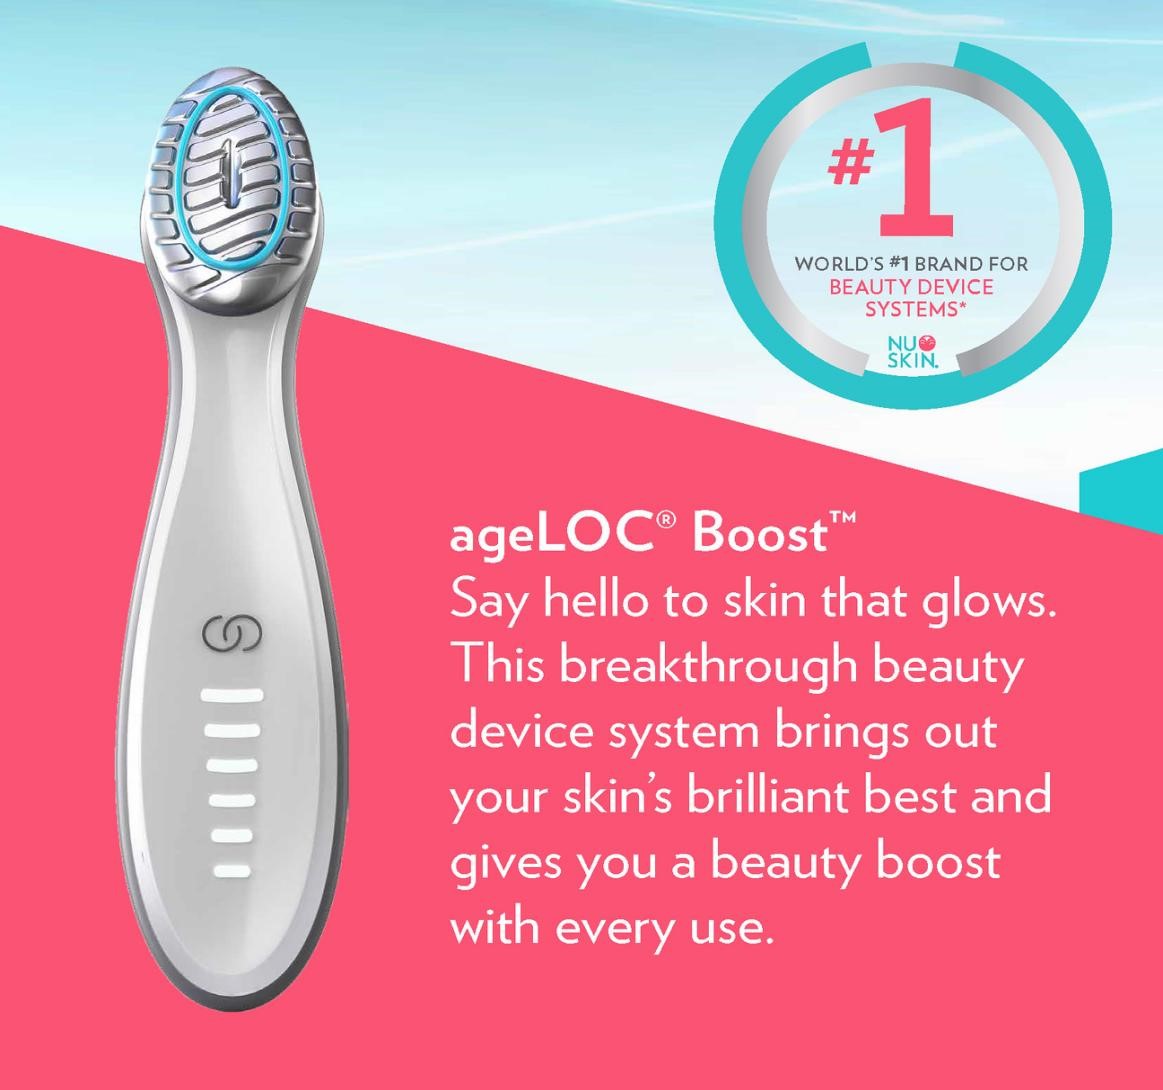 Get The Glow You've Always Wanted With ageLOC Boost